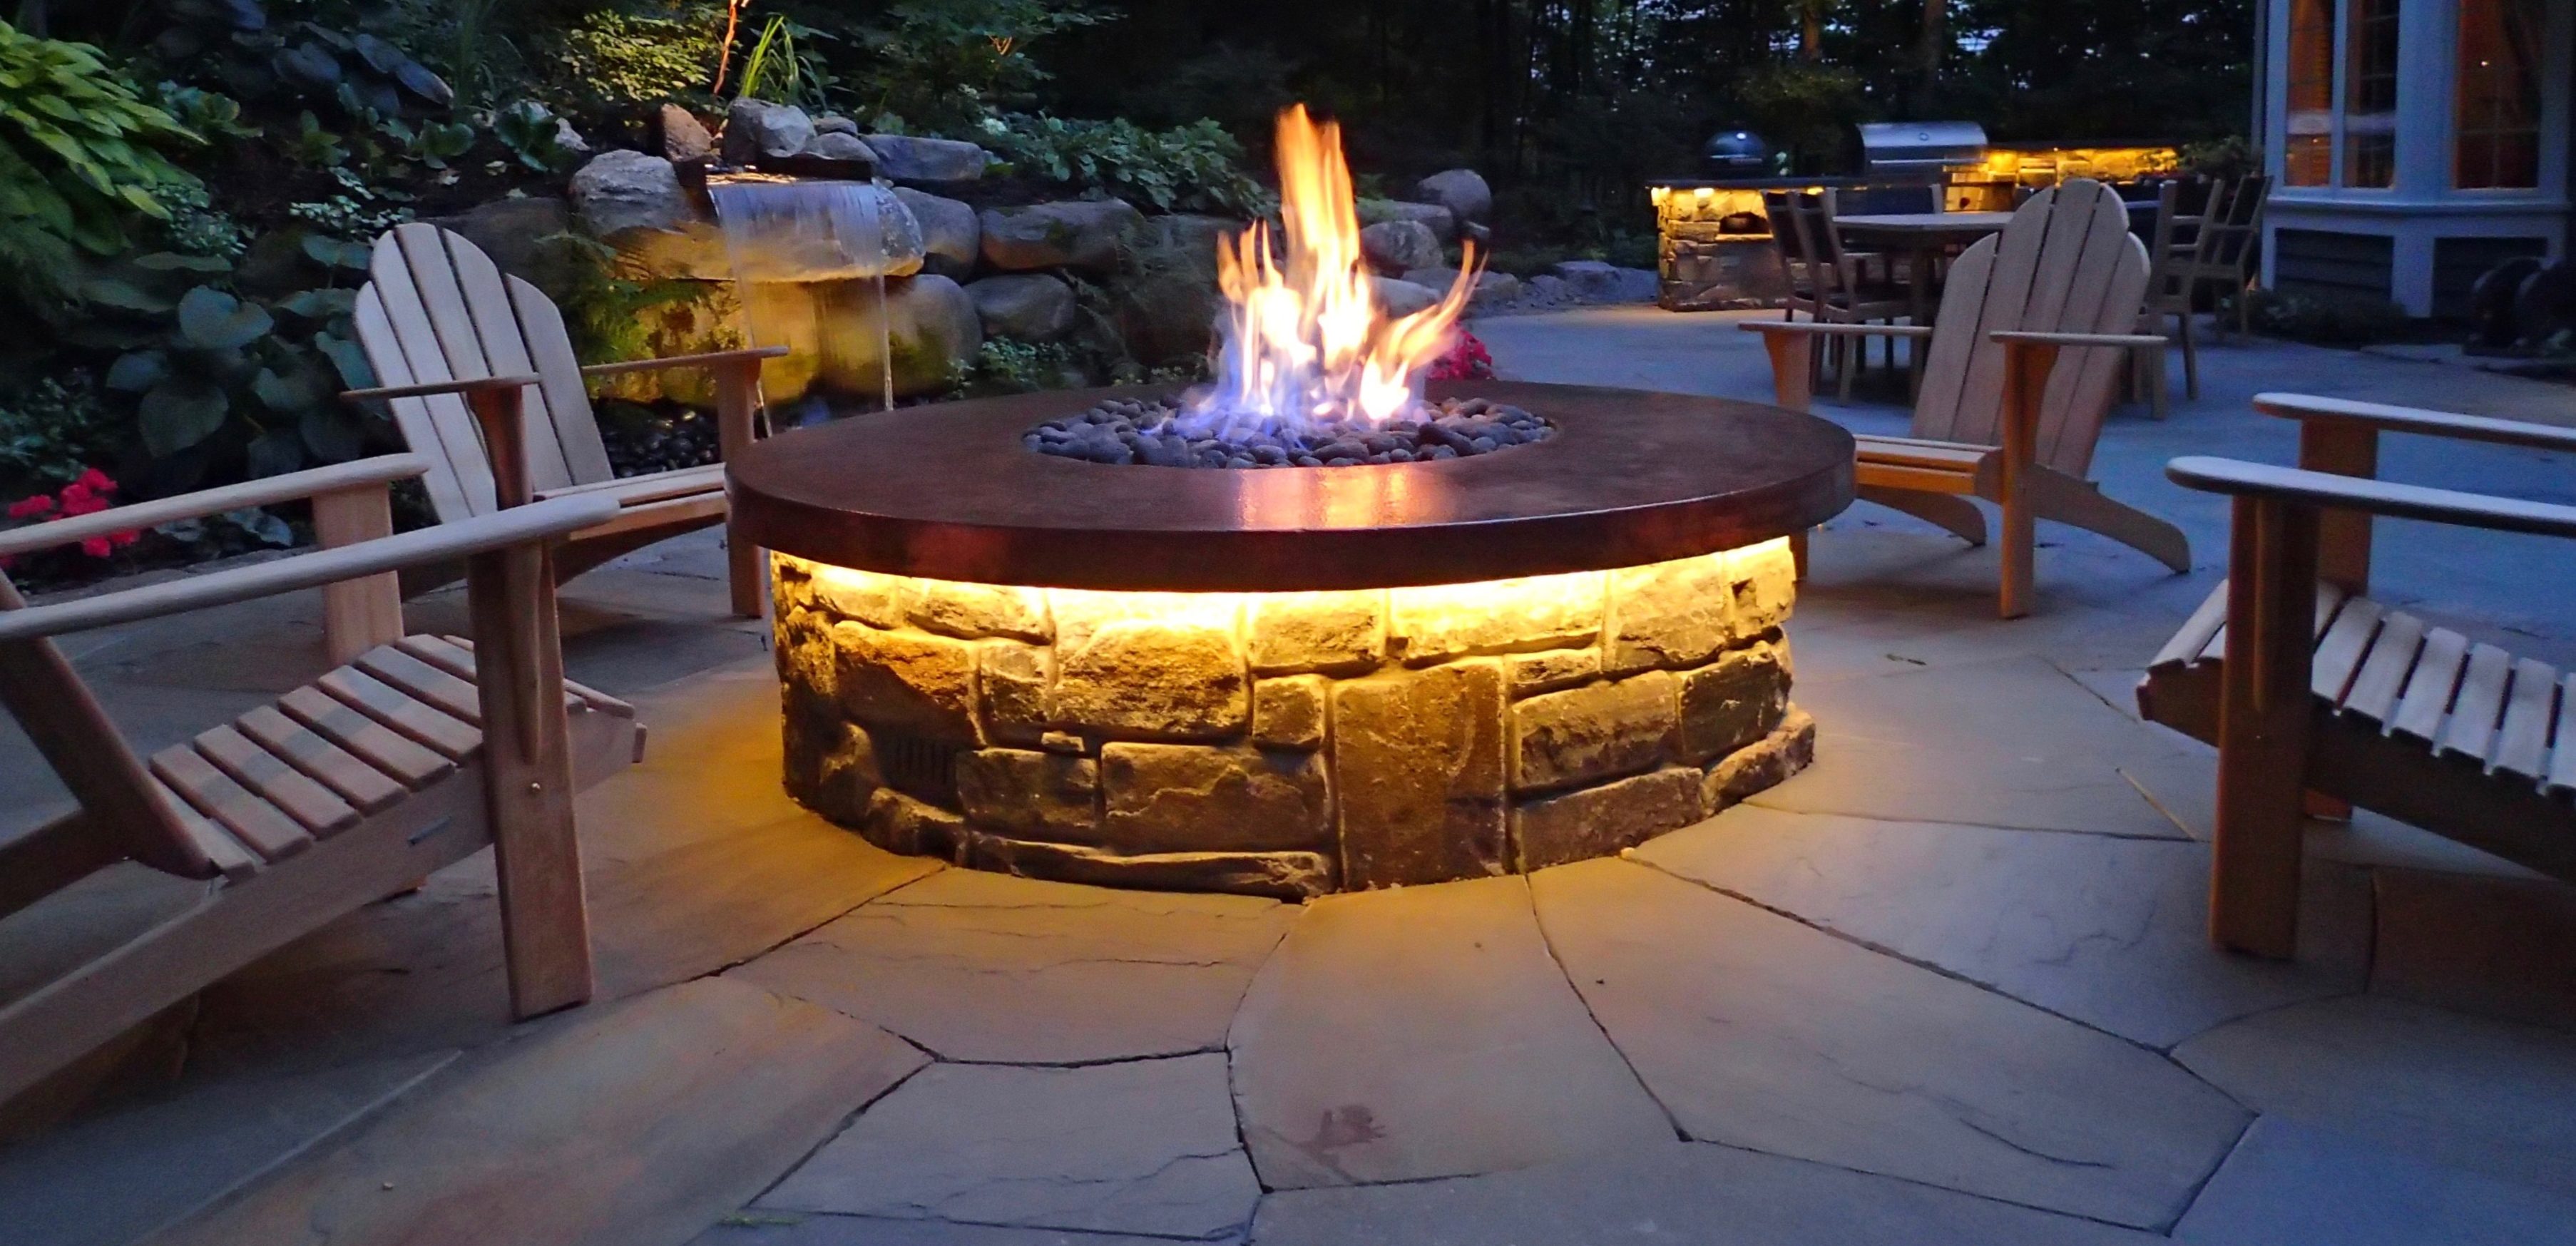 Fire-pit outdoor lighting